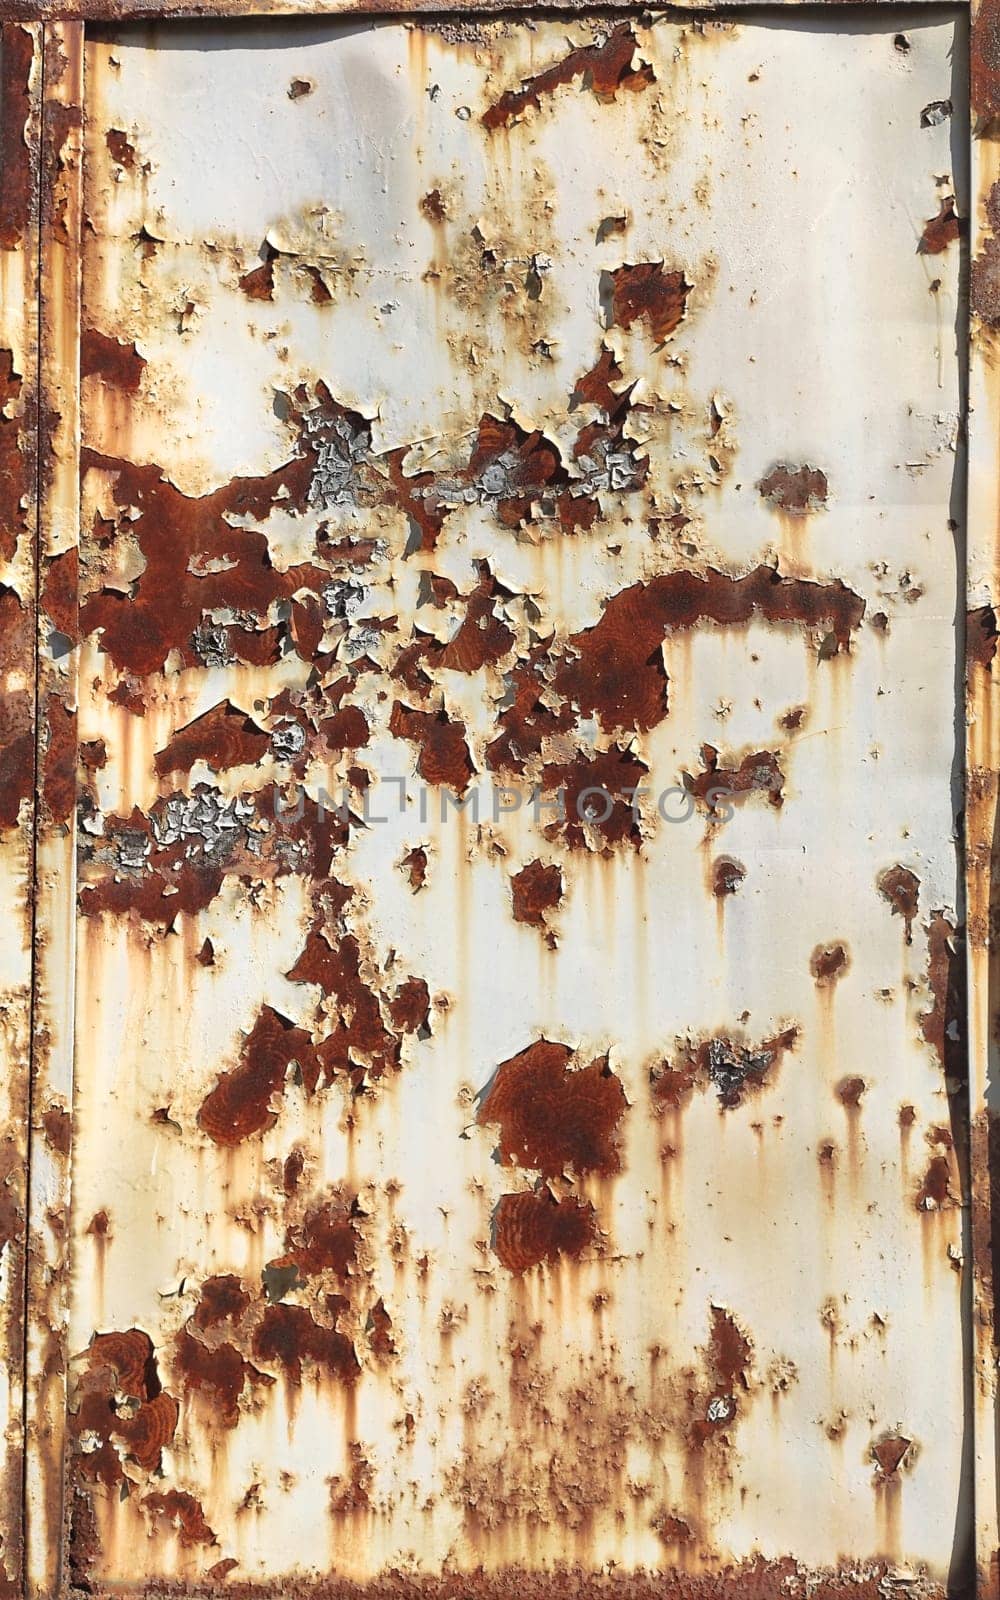 Grunge rusted metal texture. Rusty corrosion and oxidized background. Worn metallic iron rusty metal background by OnPhotoUa